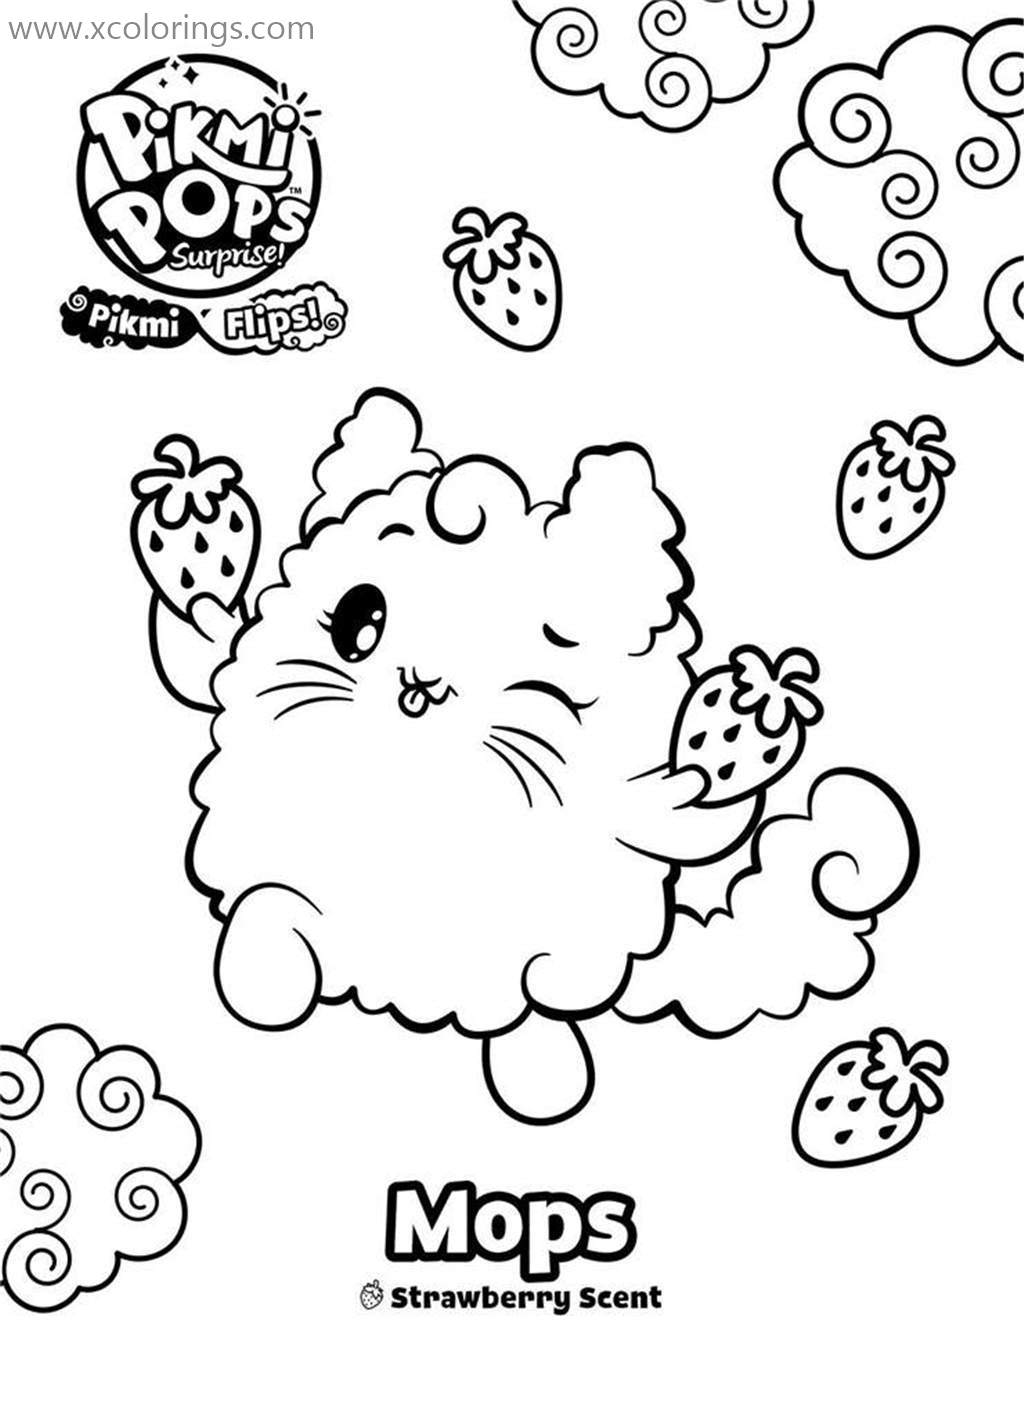 Free Pikmi Pops Coloring Pages Mops printable